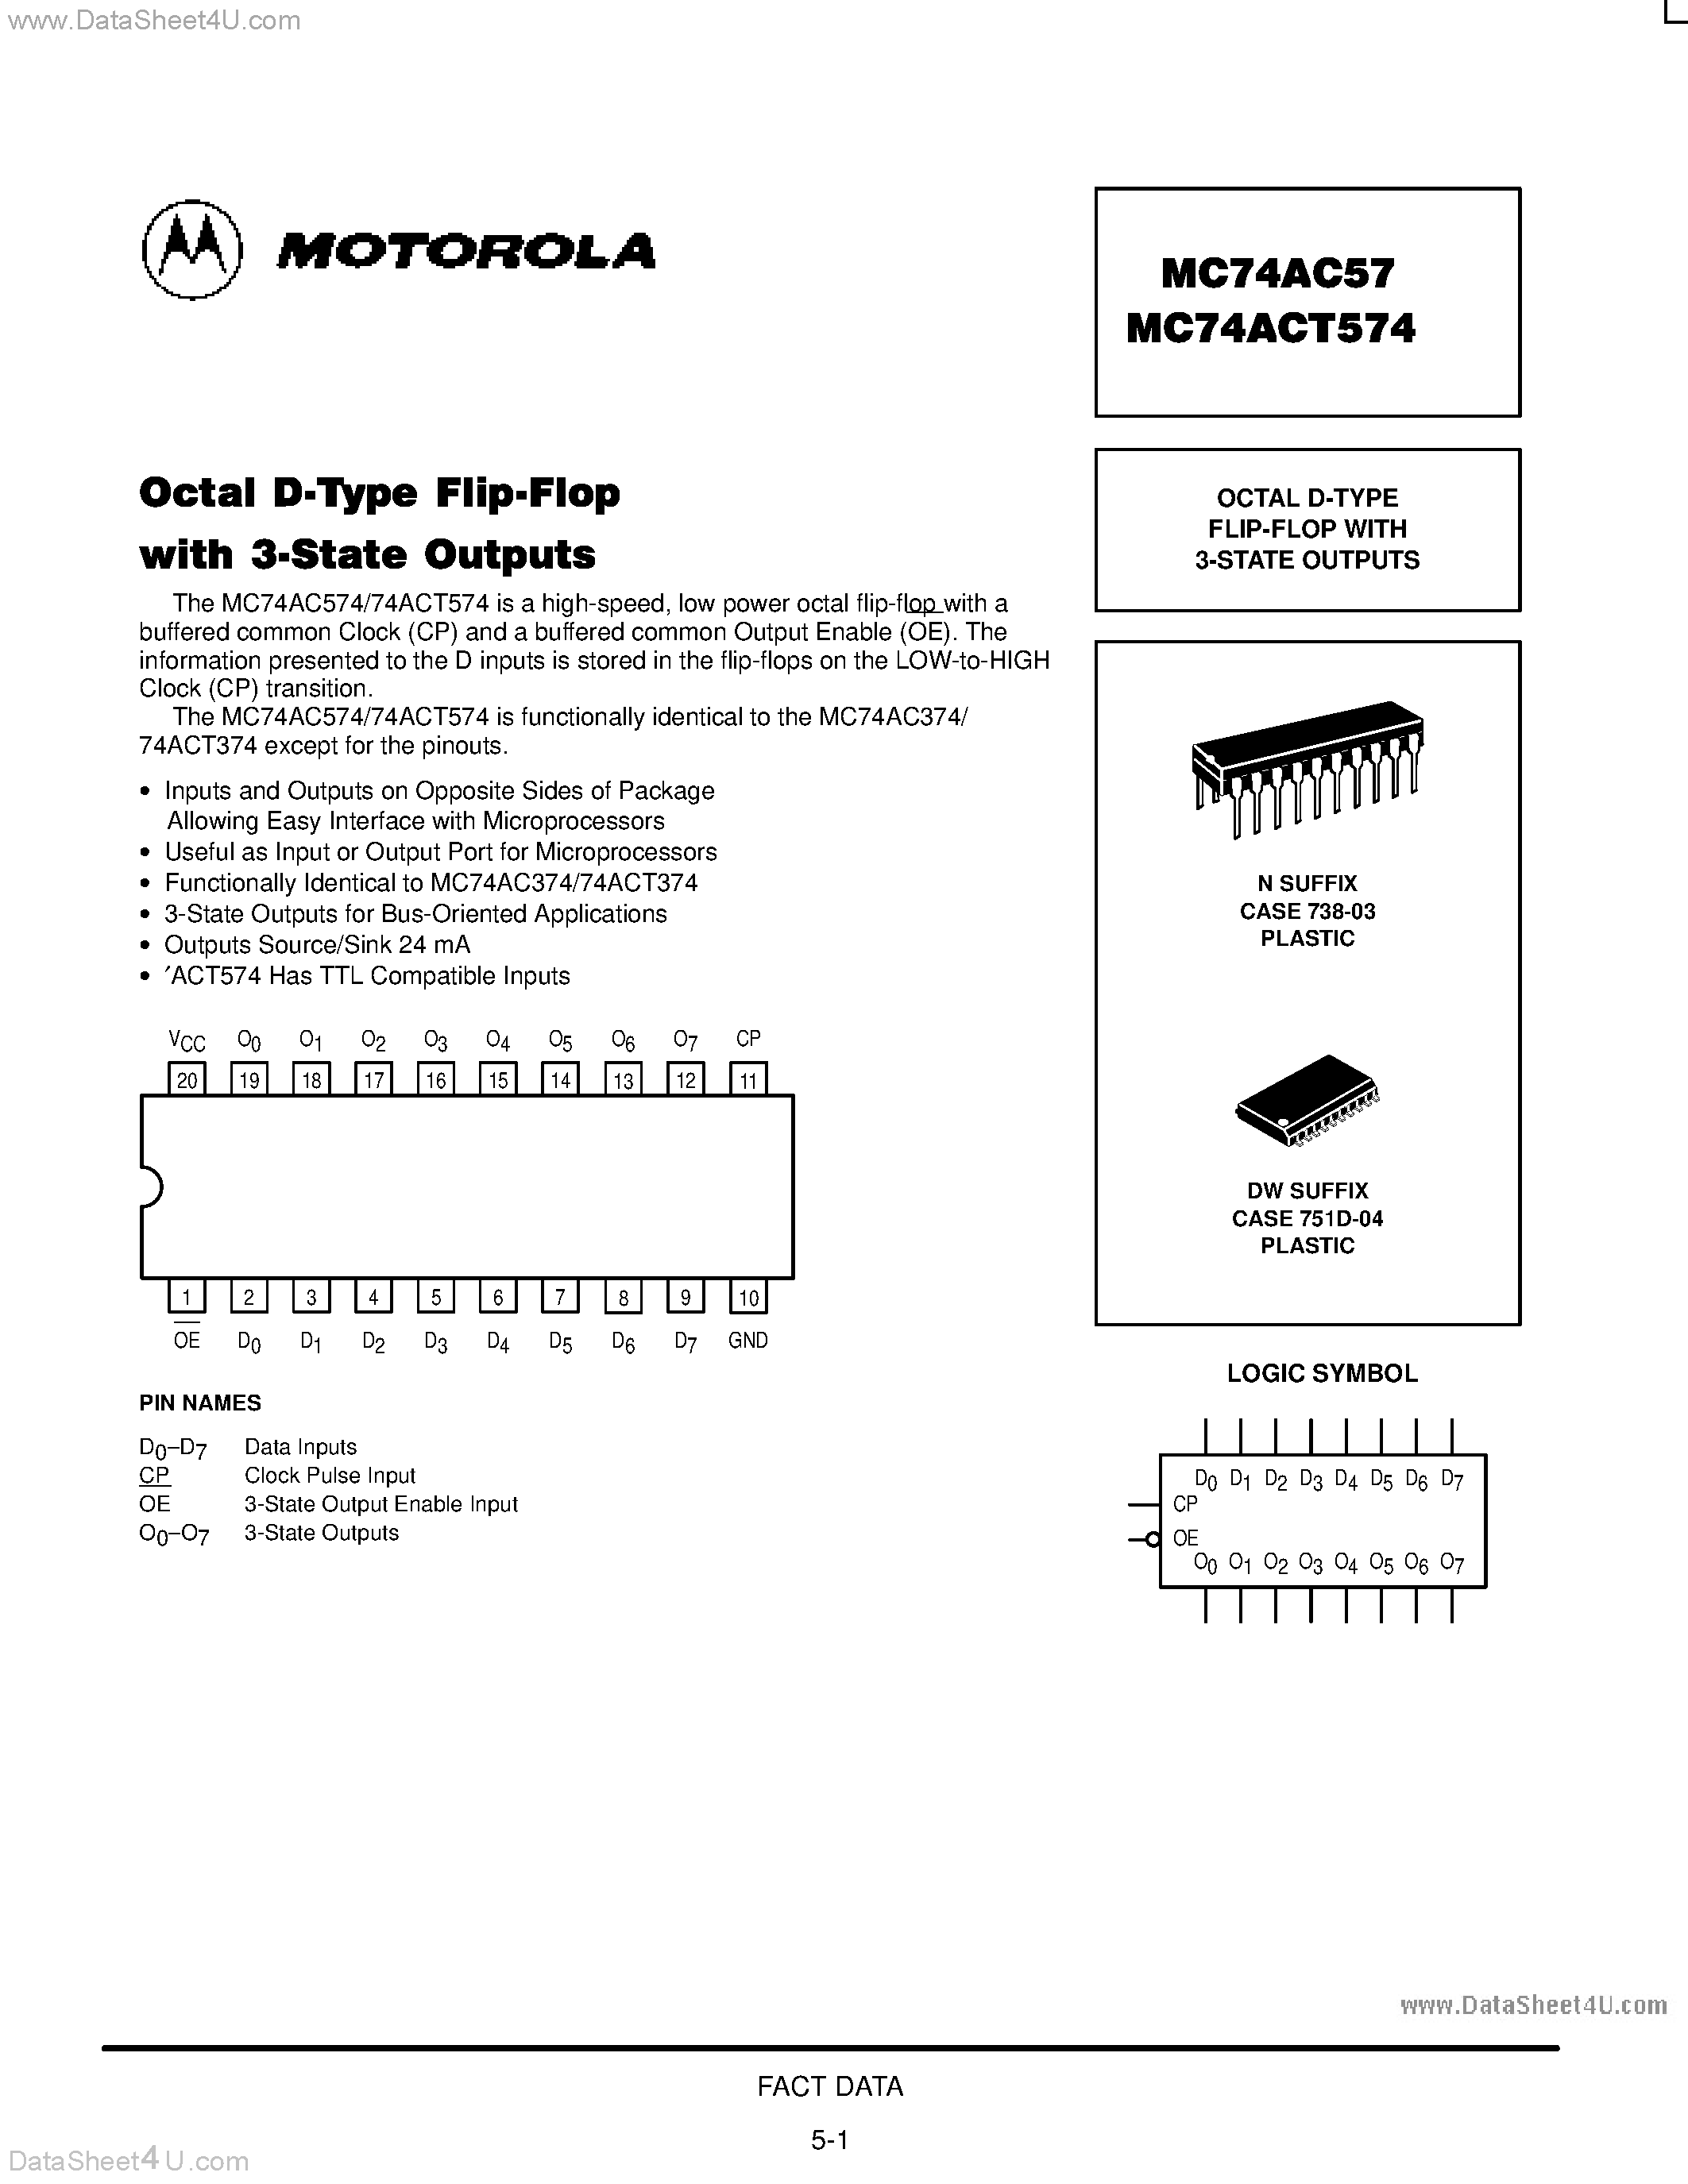 Datasheet MC74AC57 - (MC74AC57 / MC74AC574) OCTAL D-TYPE FLIP-FLOP WITH 3-STATE OUTPUTS page 1